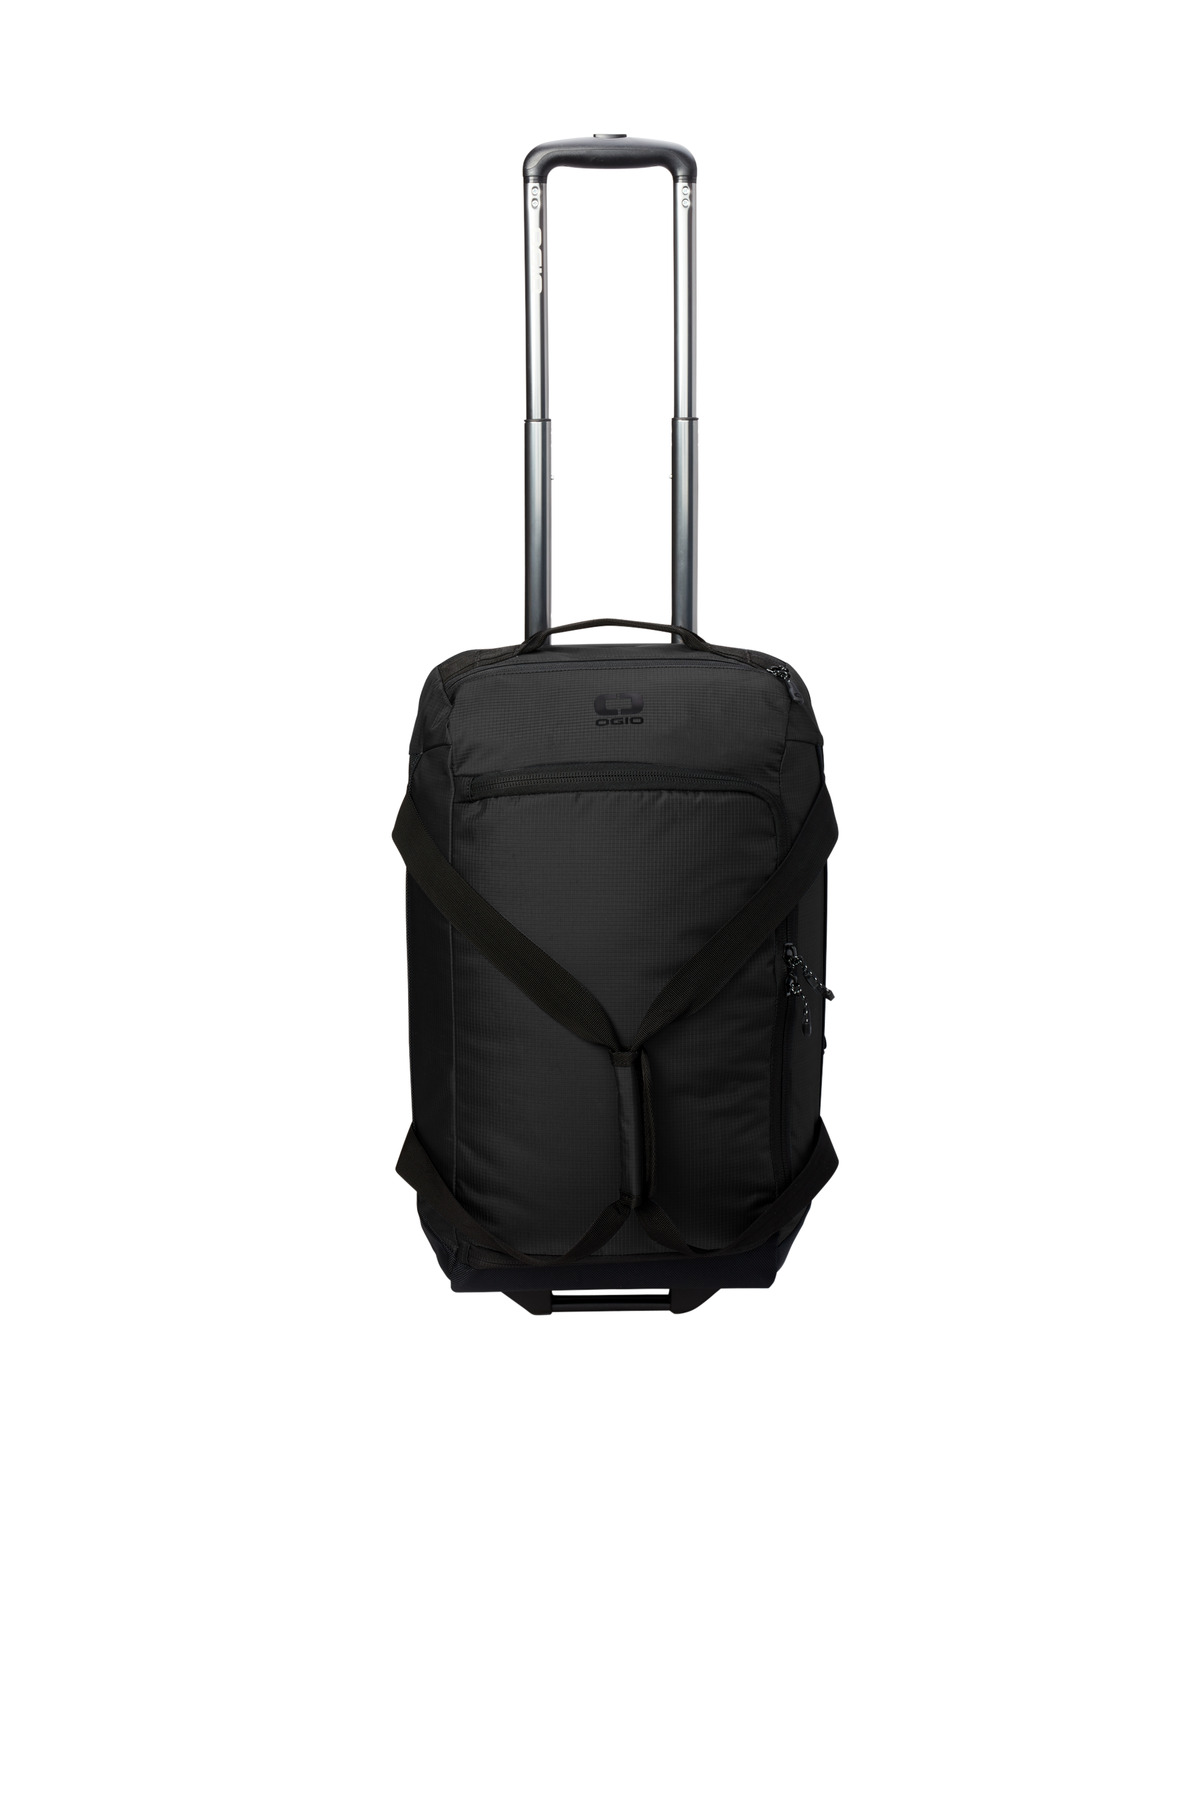 OGIO Passage Wheeled Carry-On Duffel-